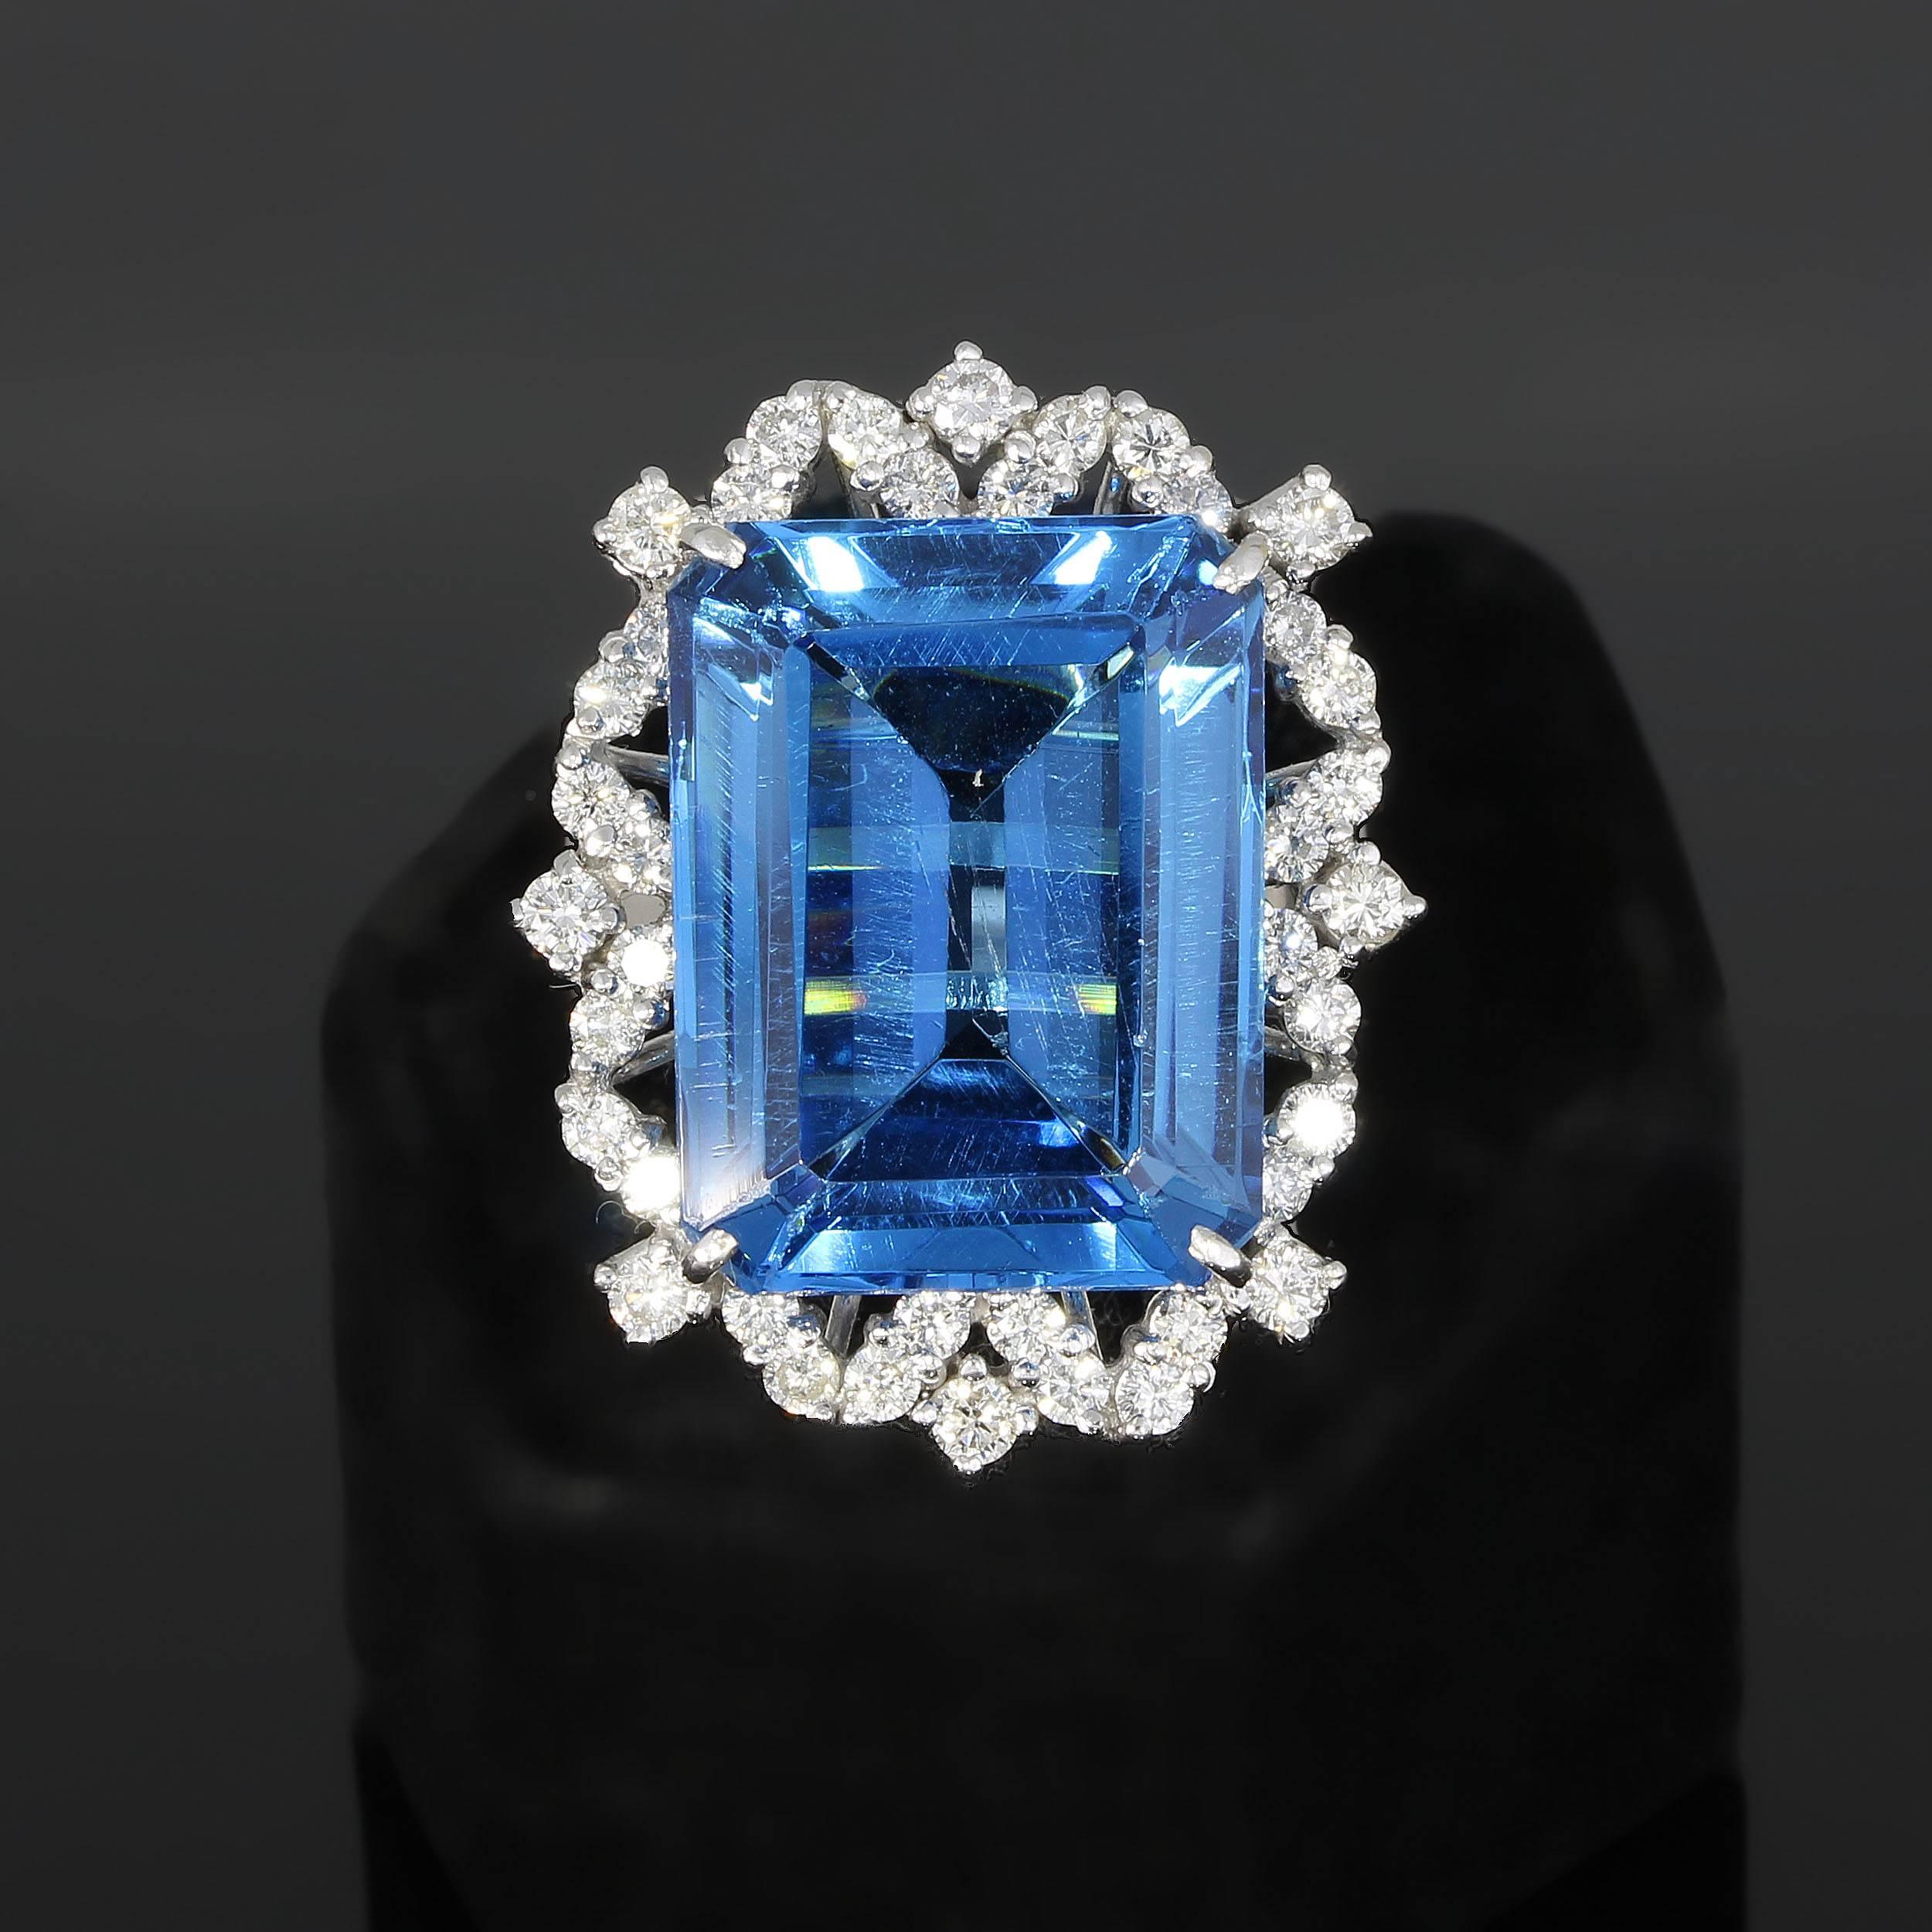 Europe, circa 2000. Set with emerald-cut blue topaz in prong setting weighing 30,38 ct. Framed by 39 brilliant-cut diamonds weighing 1,60 ct. Mounted in 14 K white gold. Hallmarked with the purity 585, star, SP. Total weight: 15,57 g.
Dimensions: